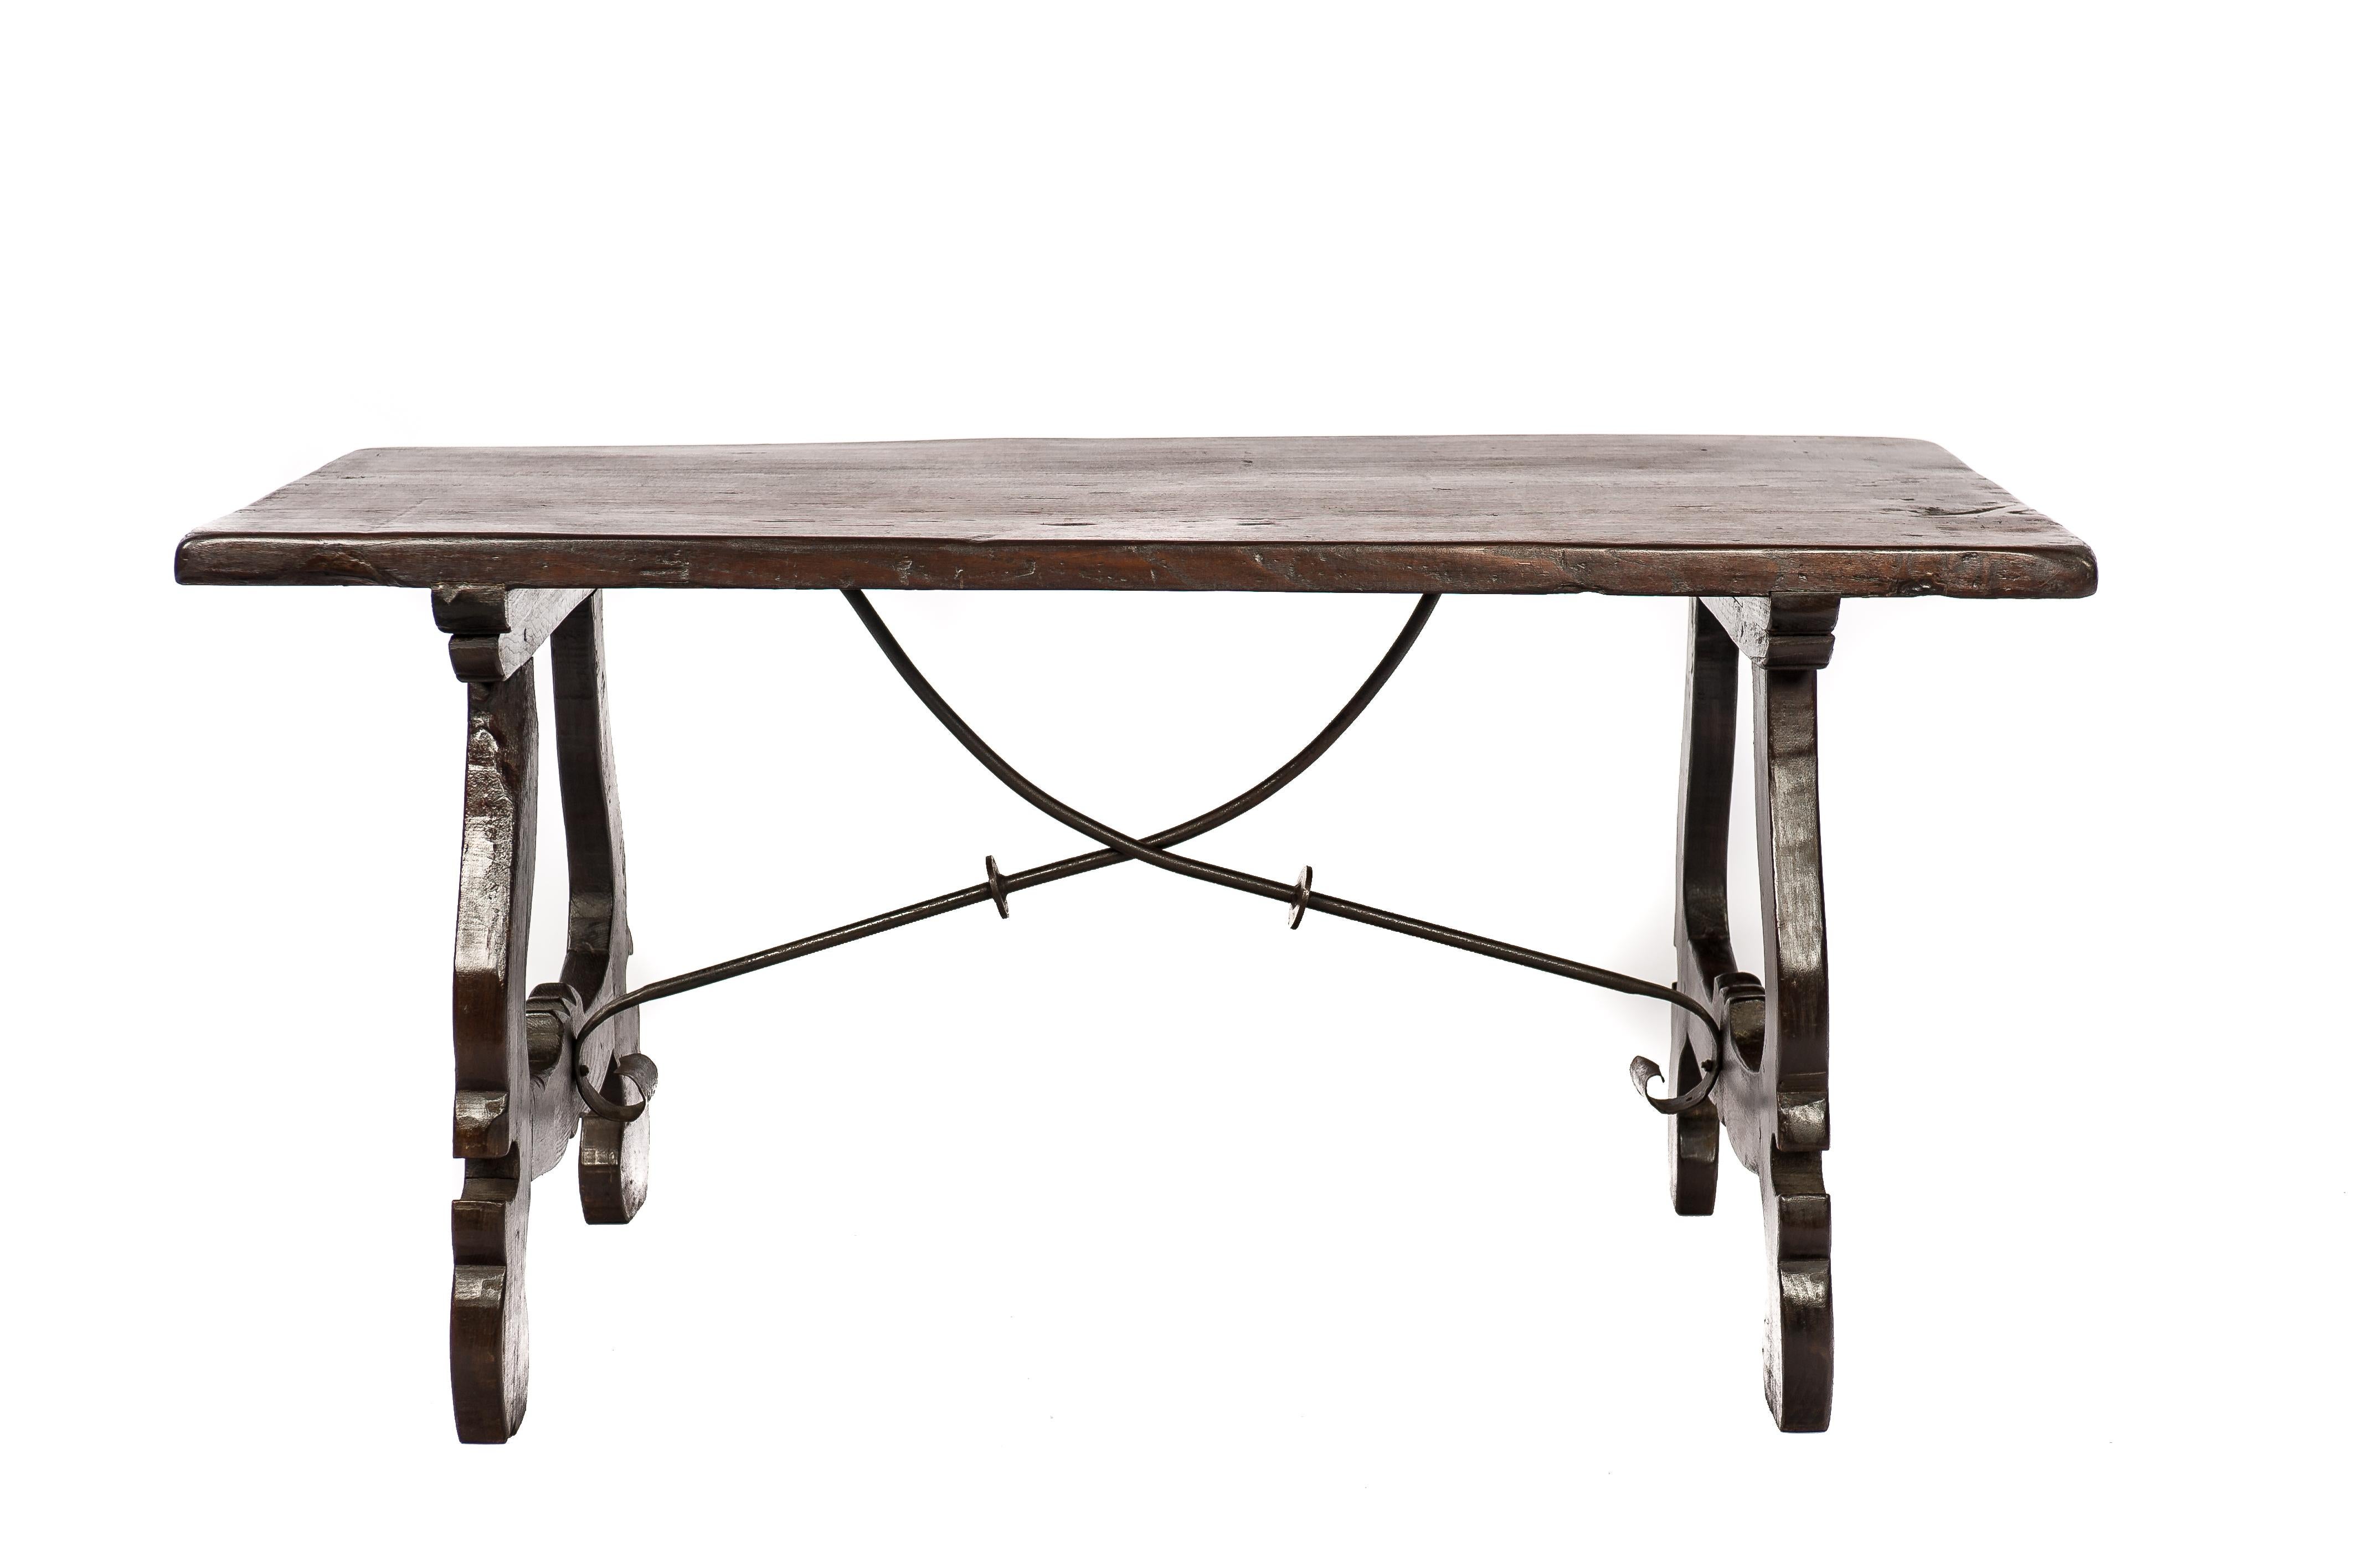 Forged Antique 19th century dark brown chestnut baroque dining table with lyre legs For Sale